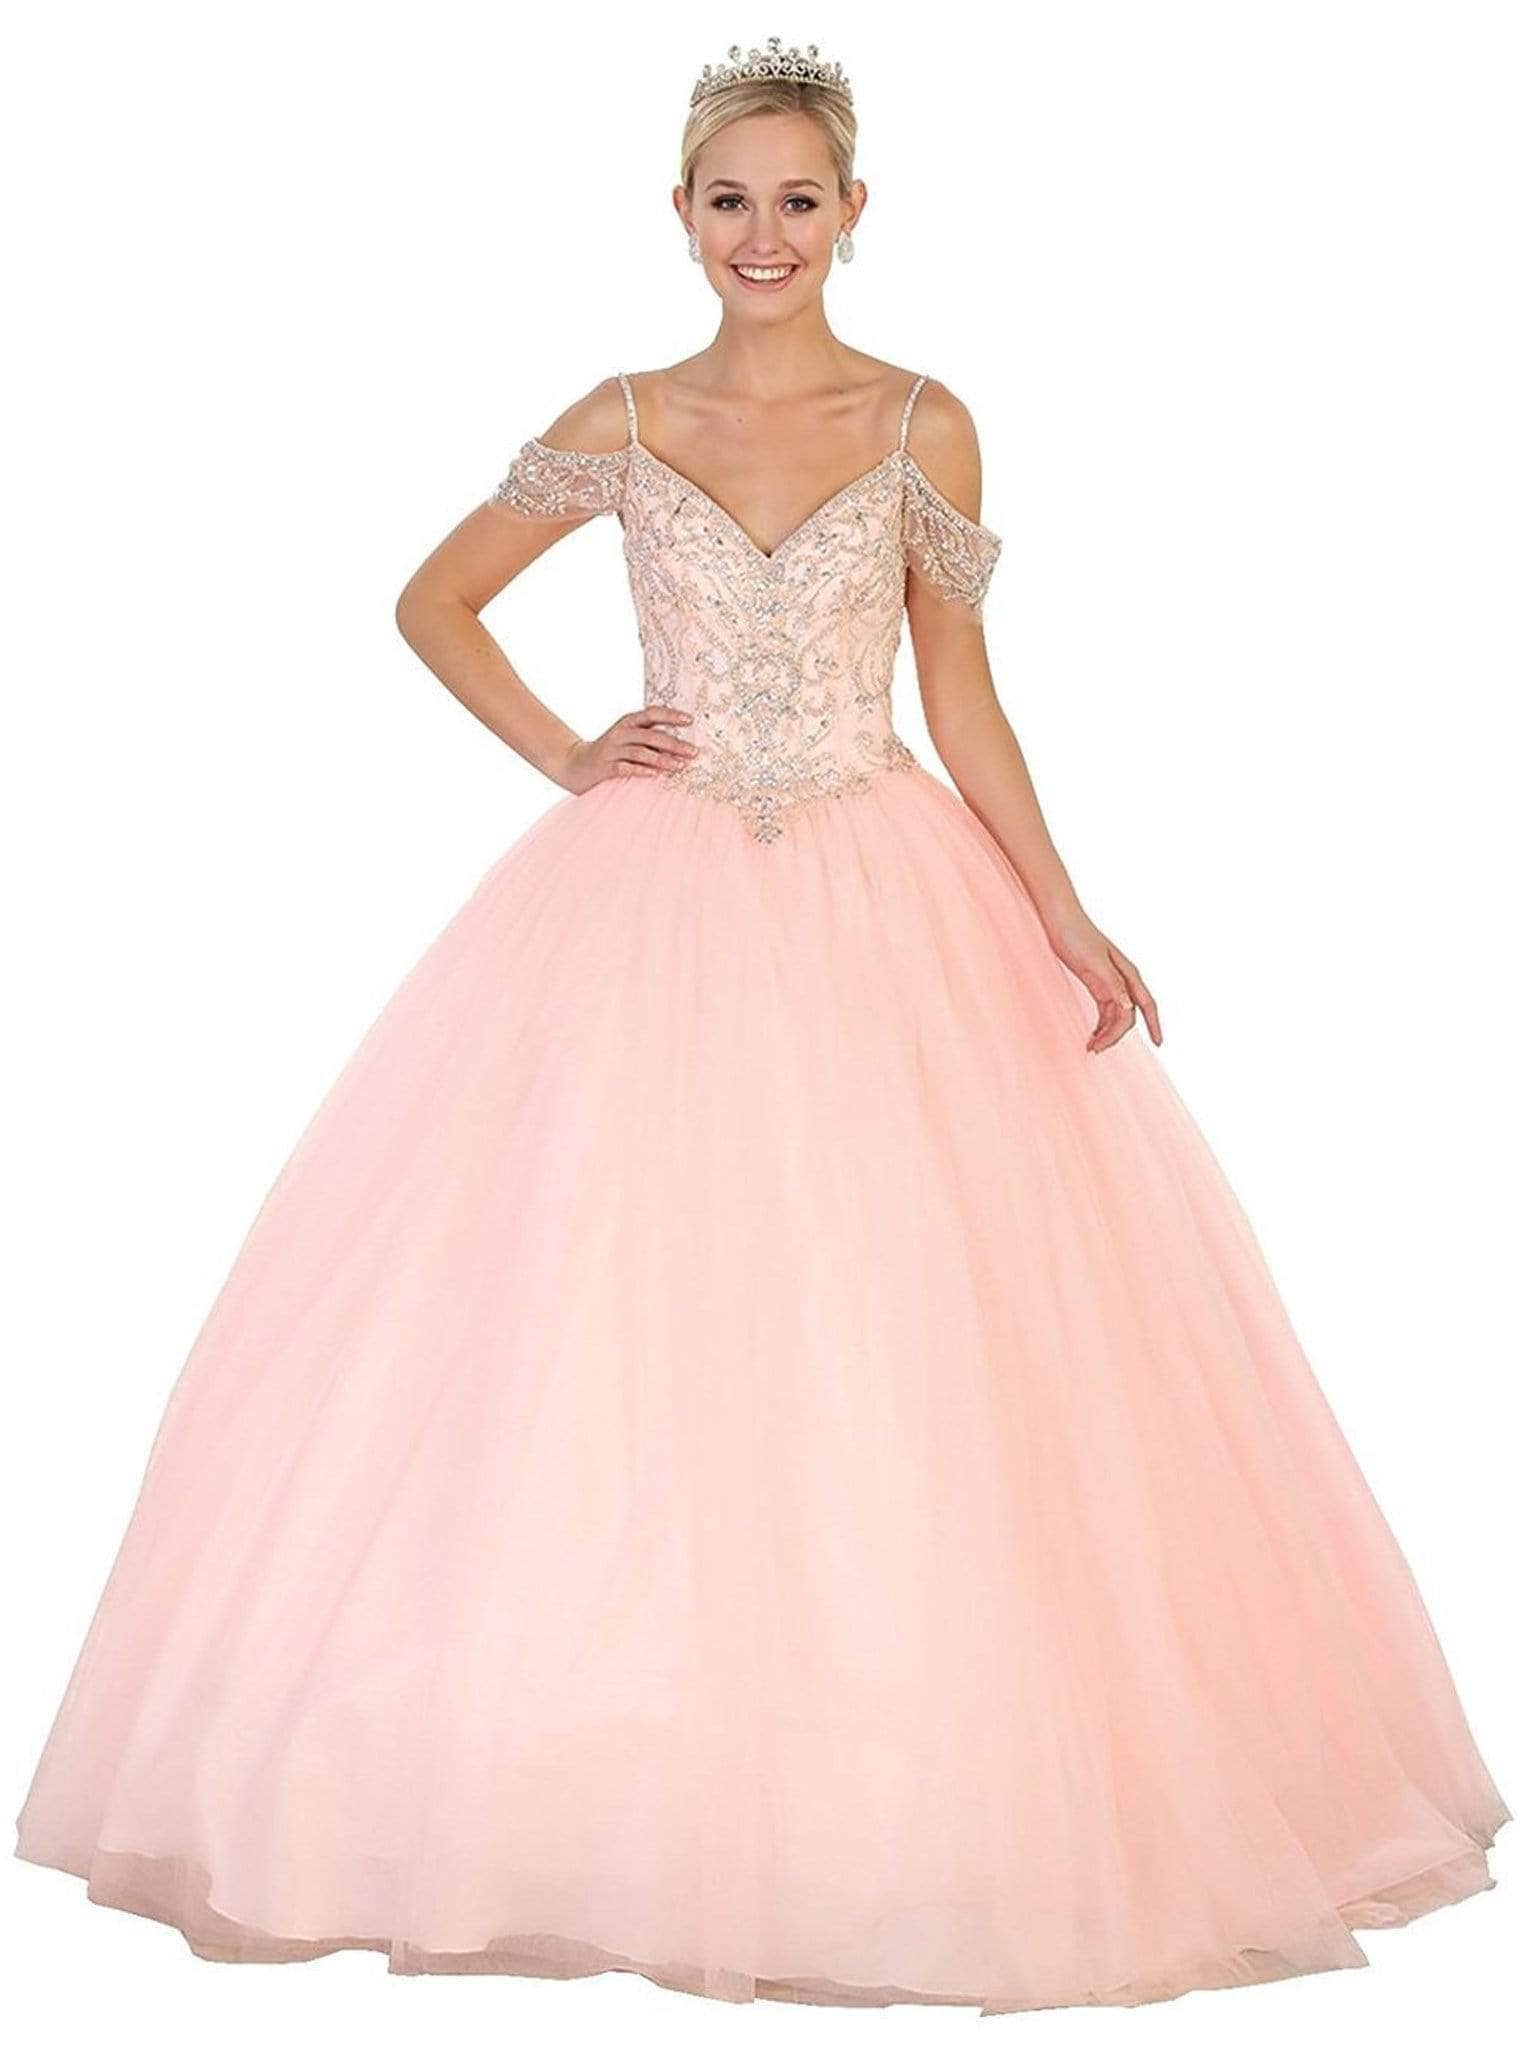 May Queen, May Queen LK96 - Cold Shoulder Embellished Quinceanera Ballgown